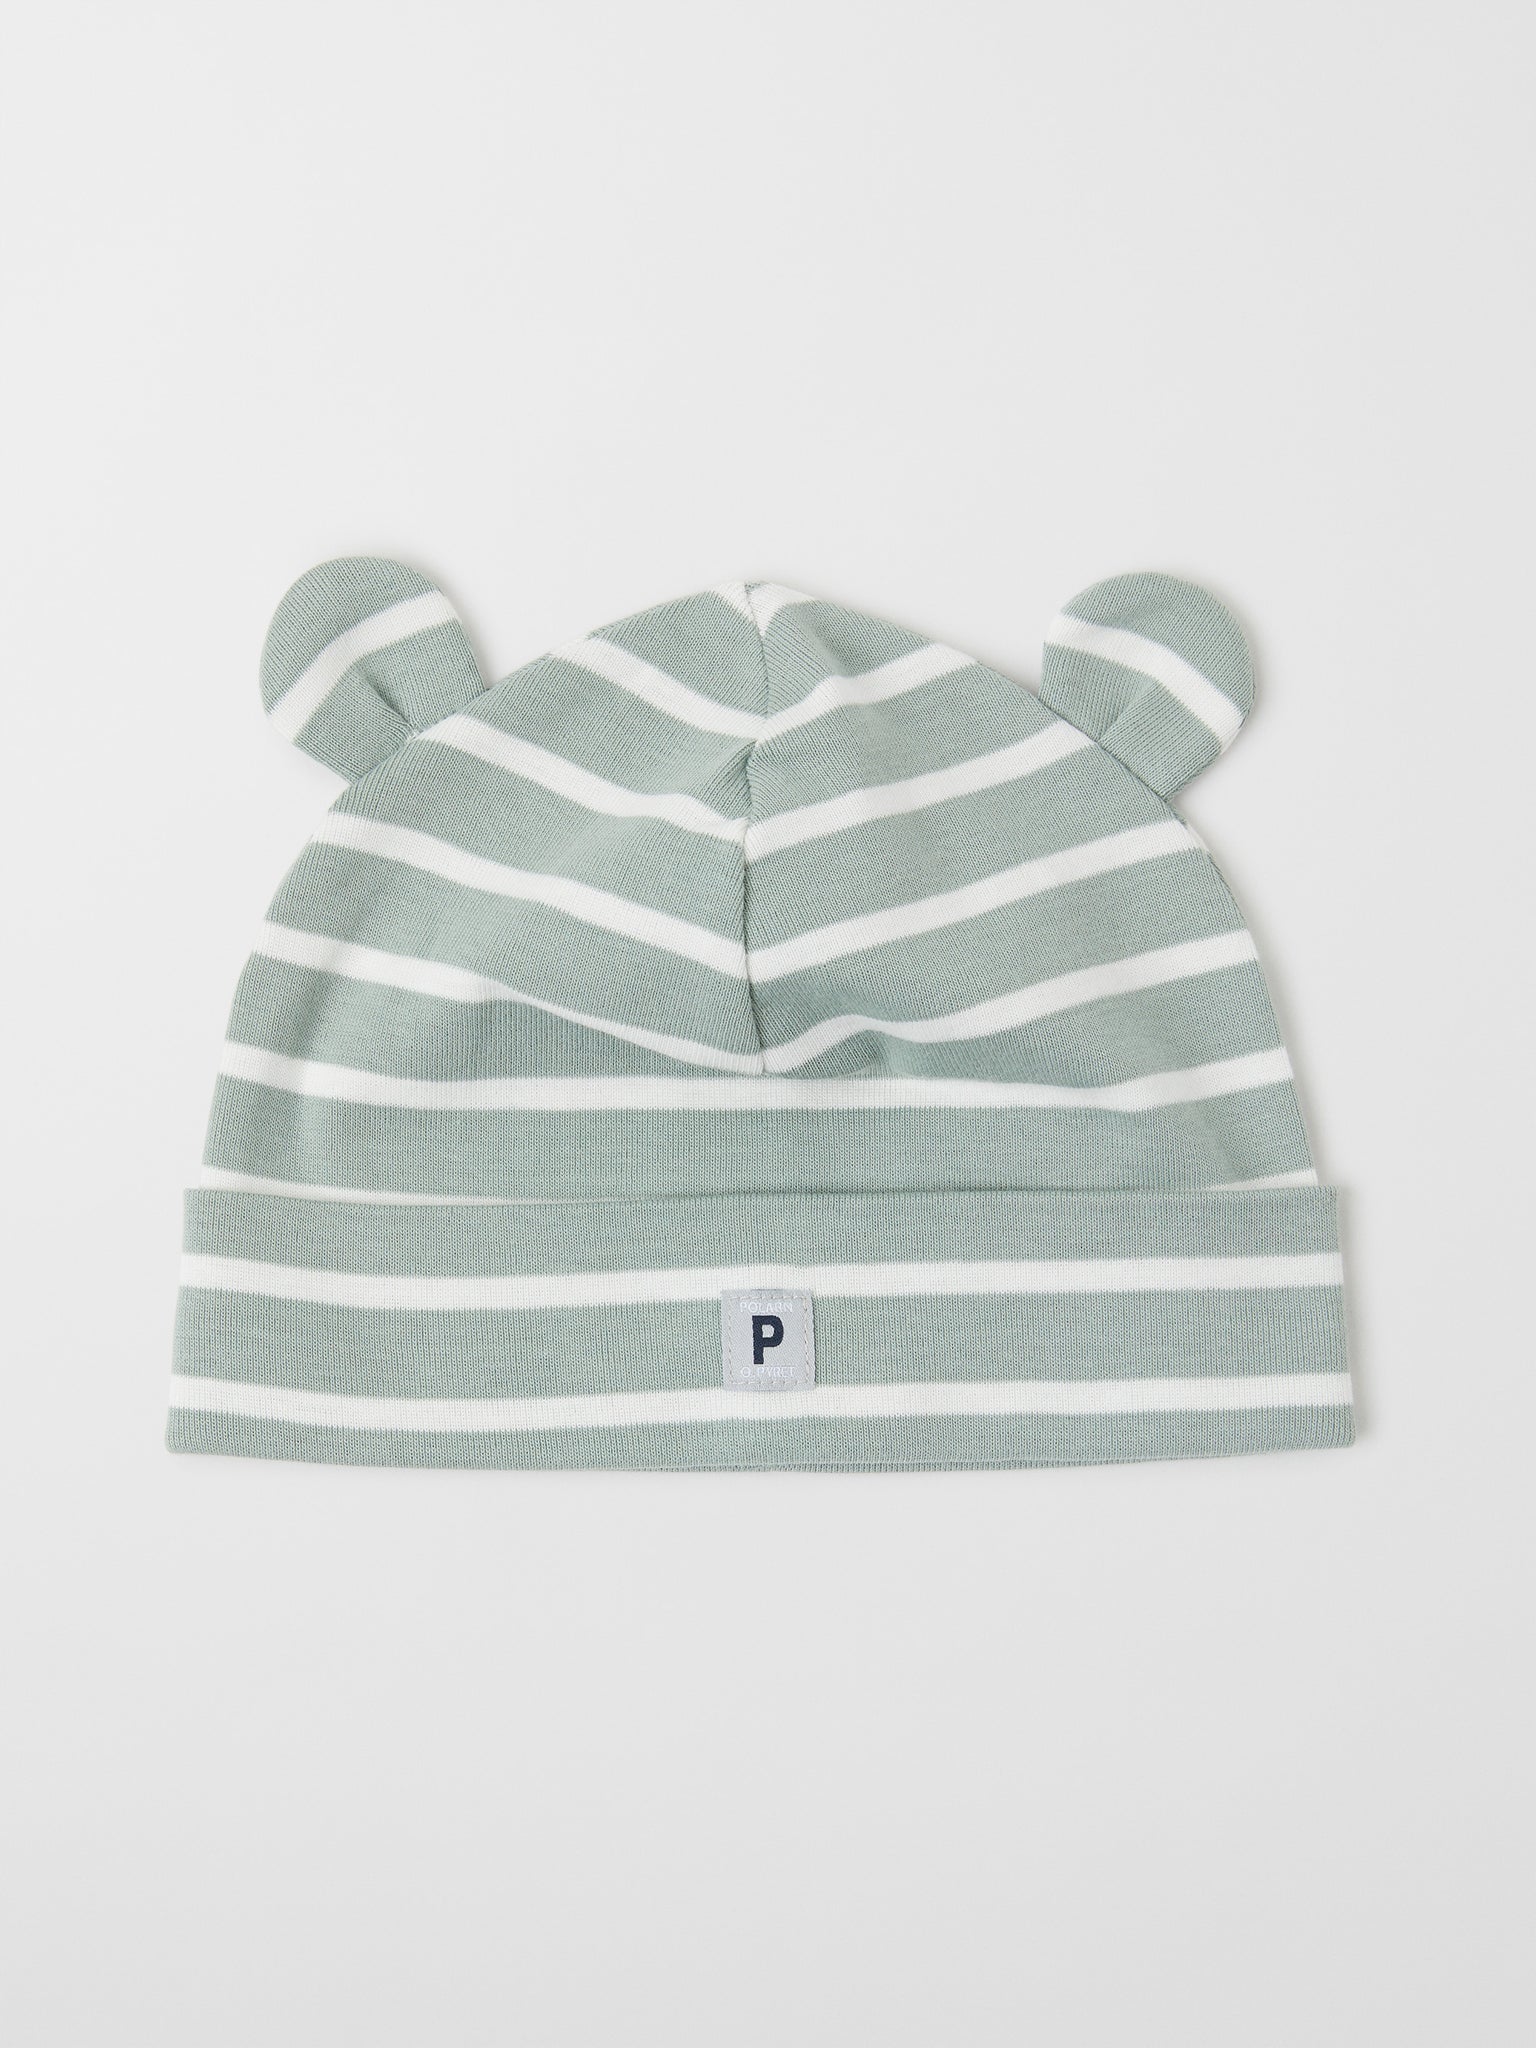 Striped Green Baby Beanie Hat from the Polarn O. Pyret baby collection. Clothes made using sustainably sourced materials.